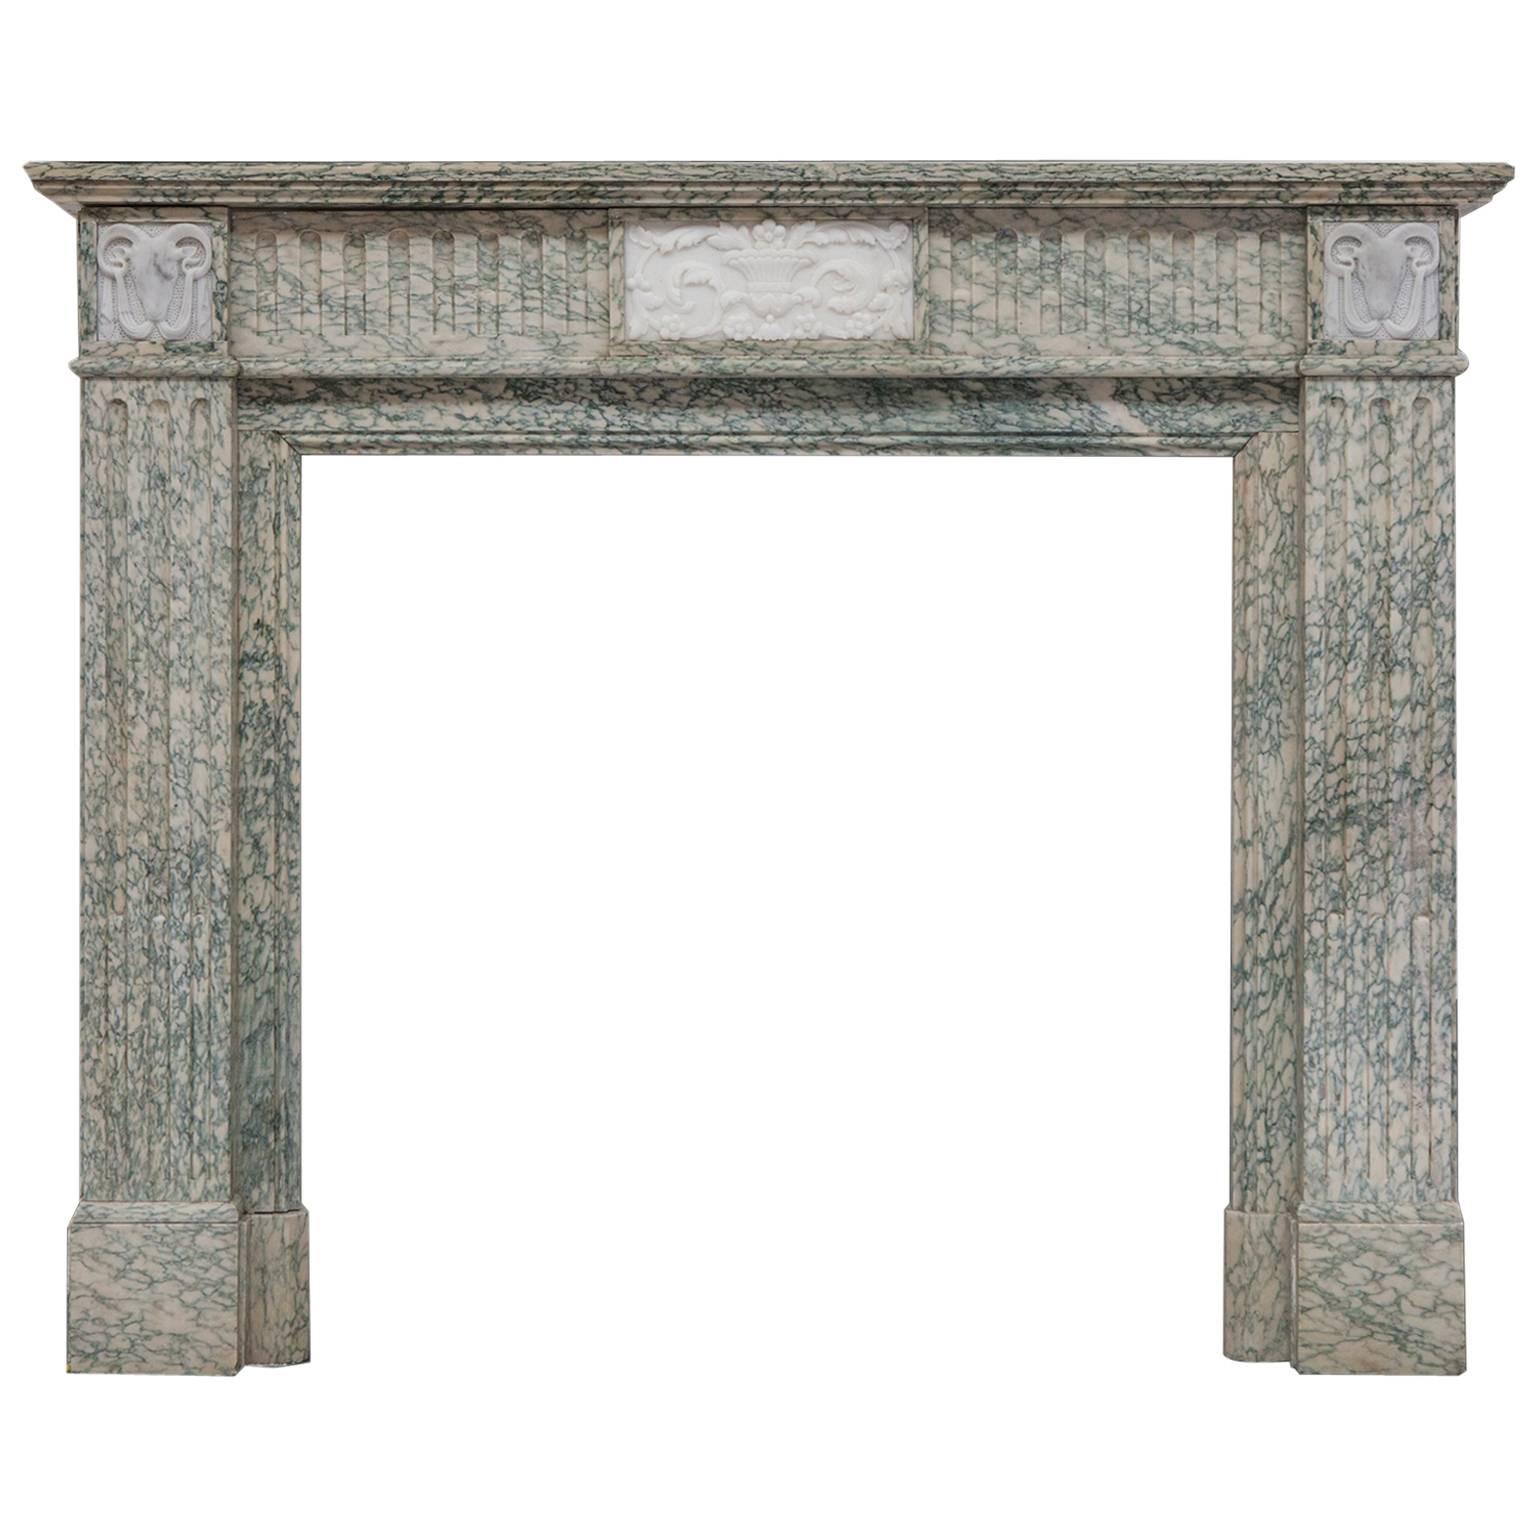 19th Century Neoclassical Louis XVI Fireplace Mantel In Campam Vert Marble